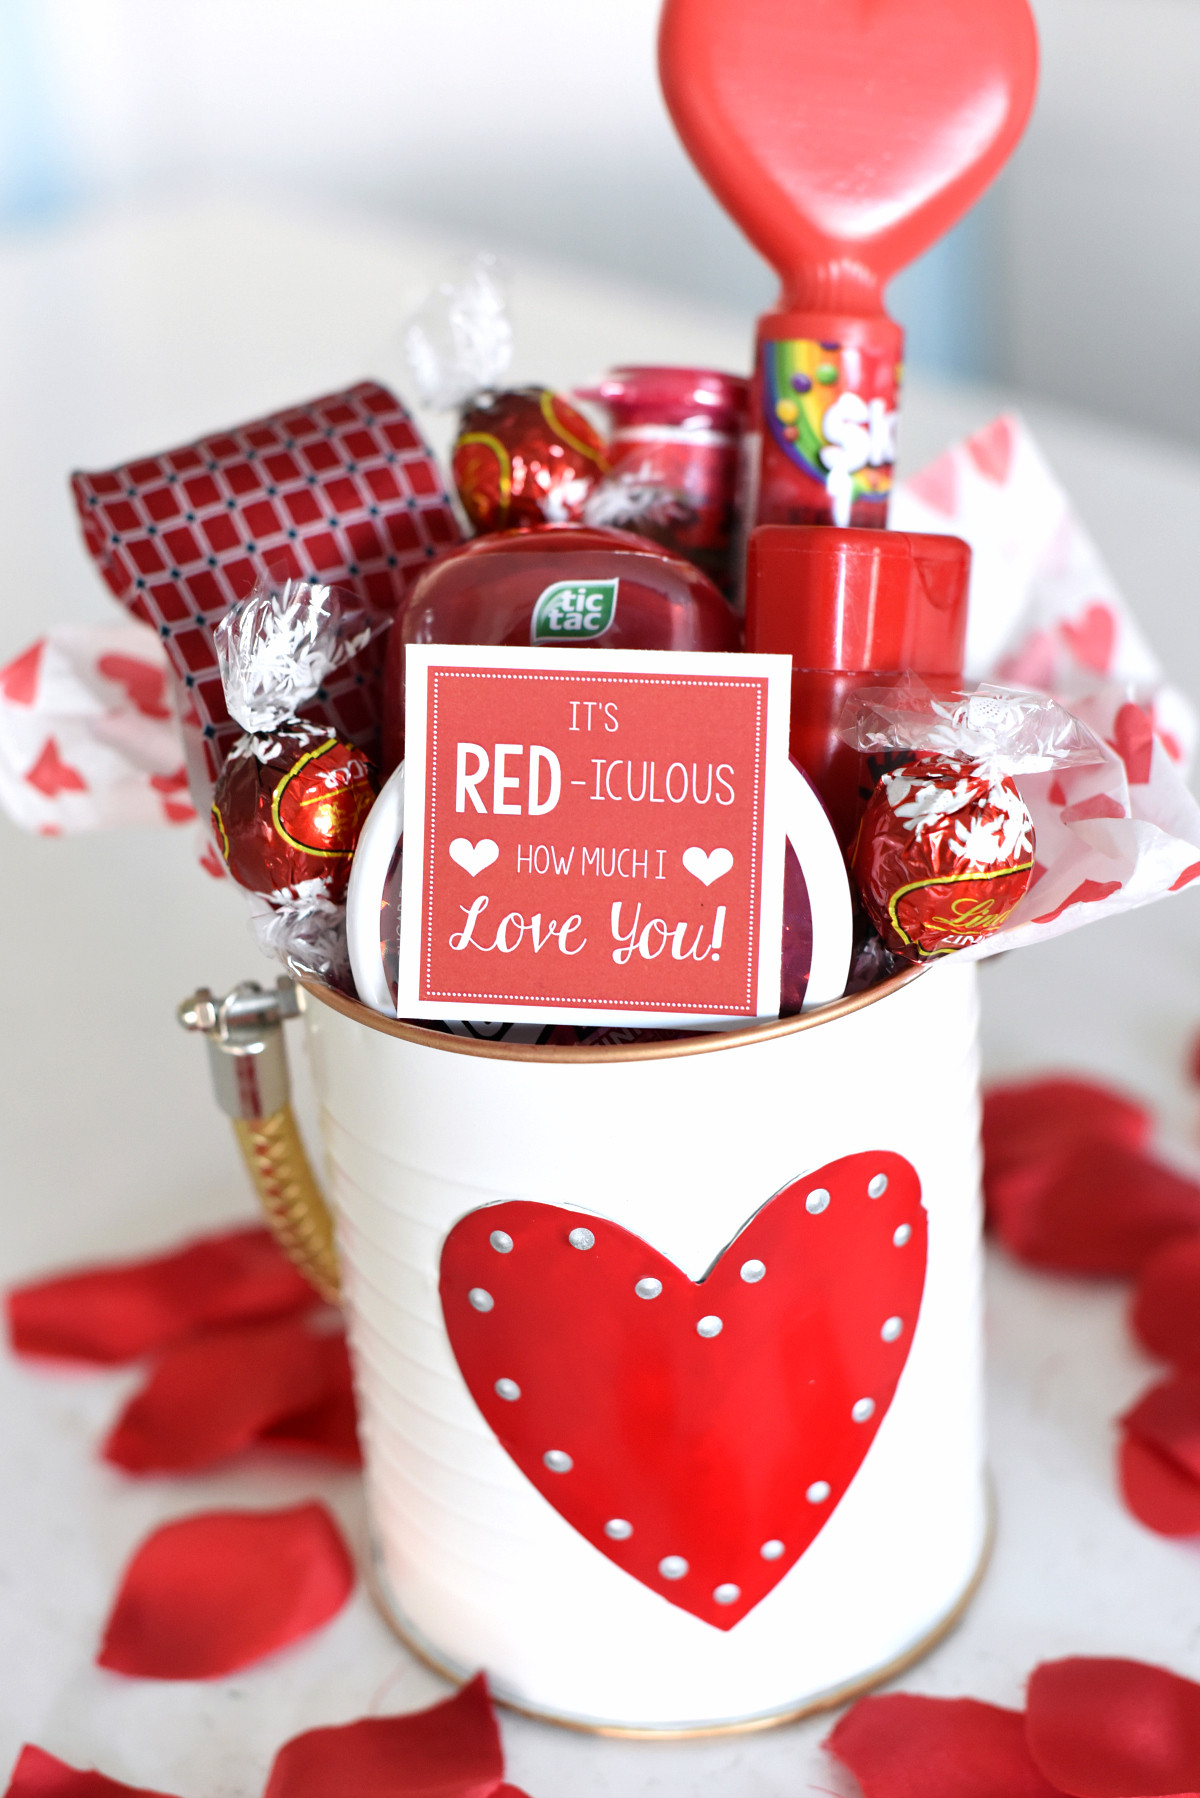 Gift Ideas For Valentines Day For Her
 25 DIY Valentine s Day Gift Ideas Teens Will Love